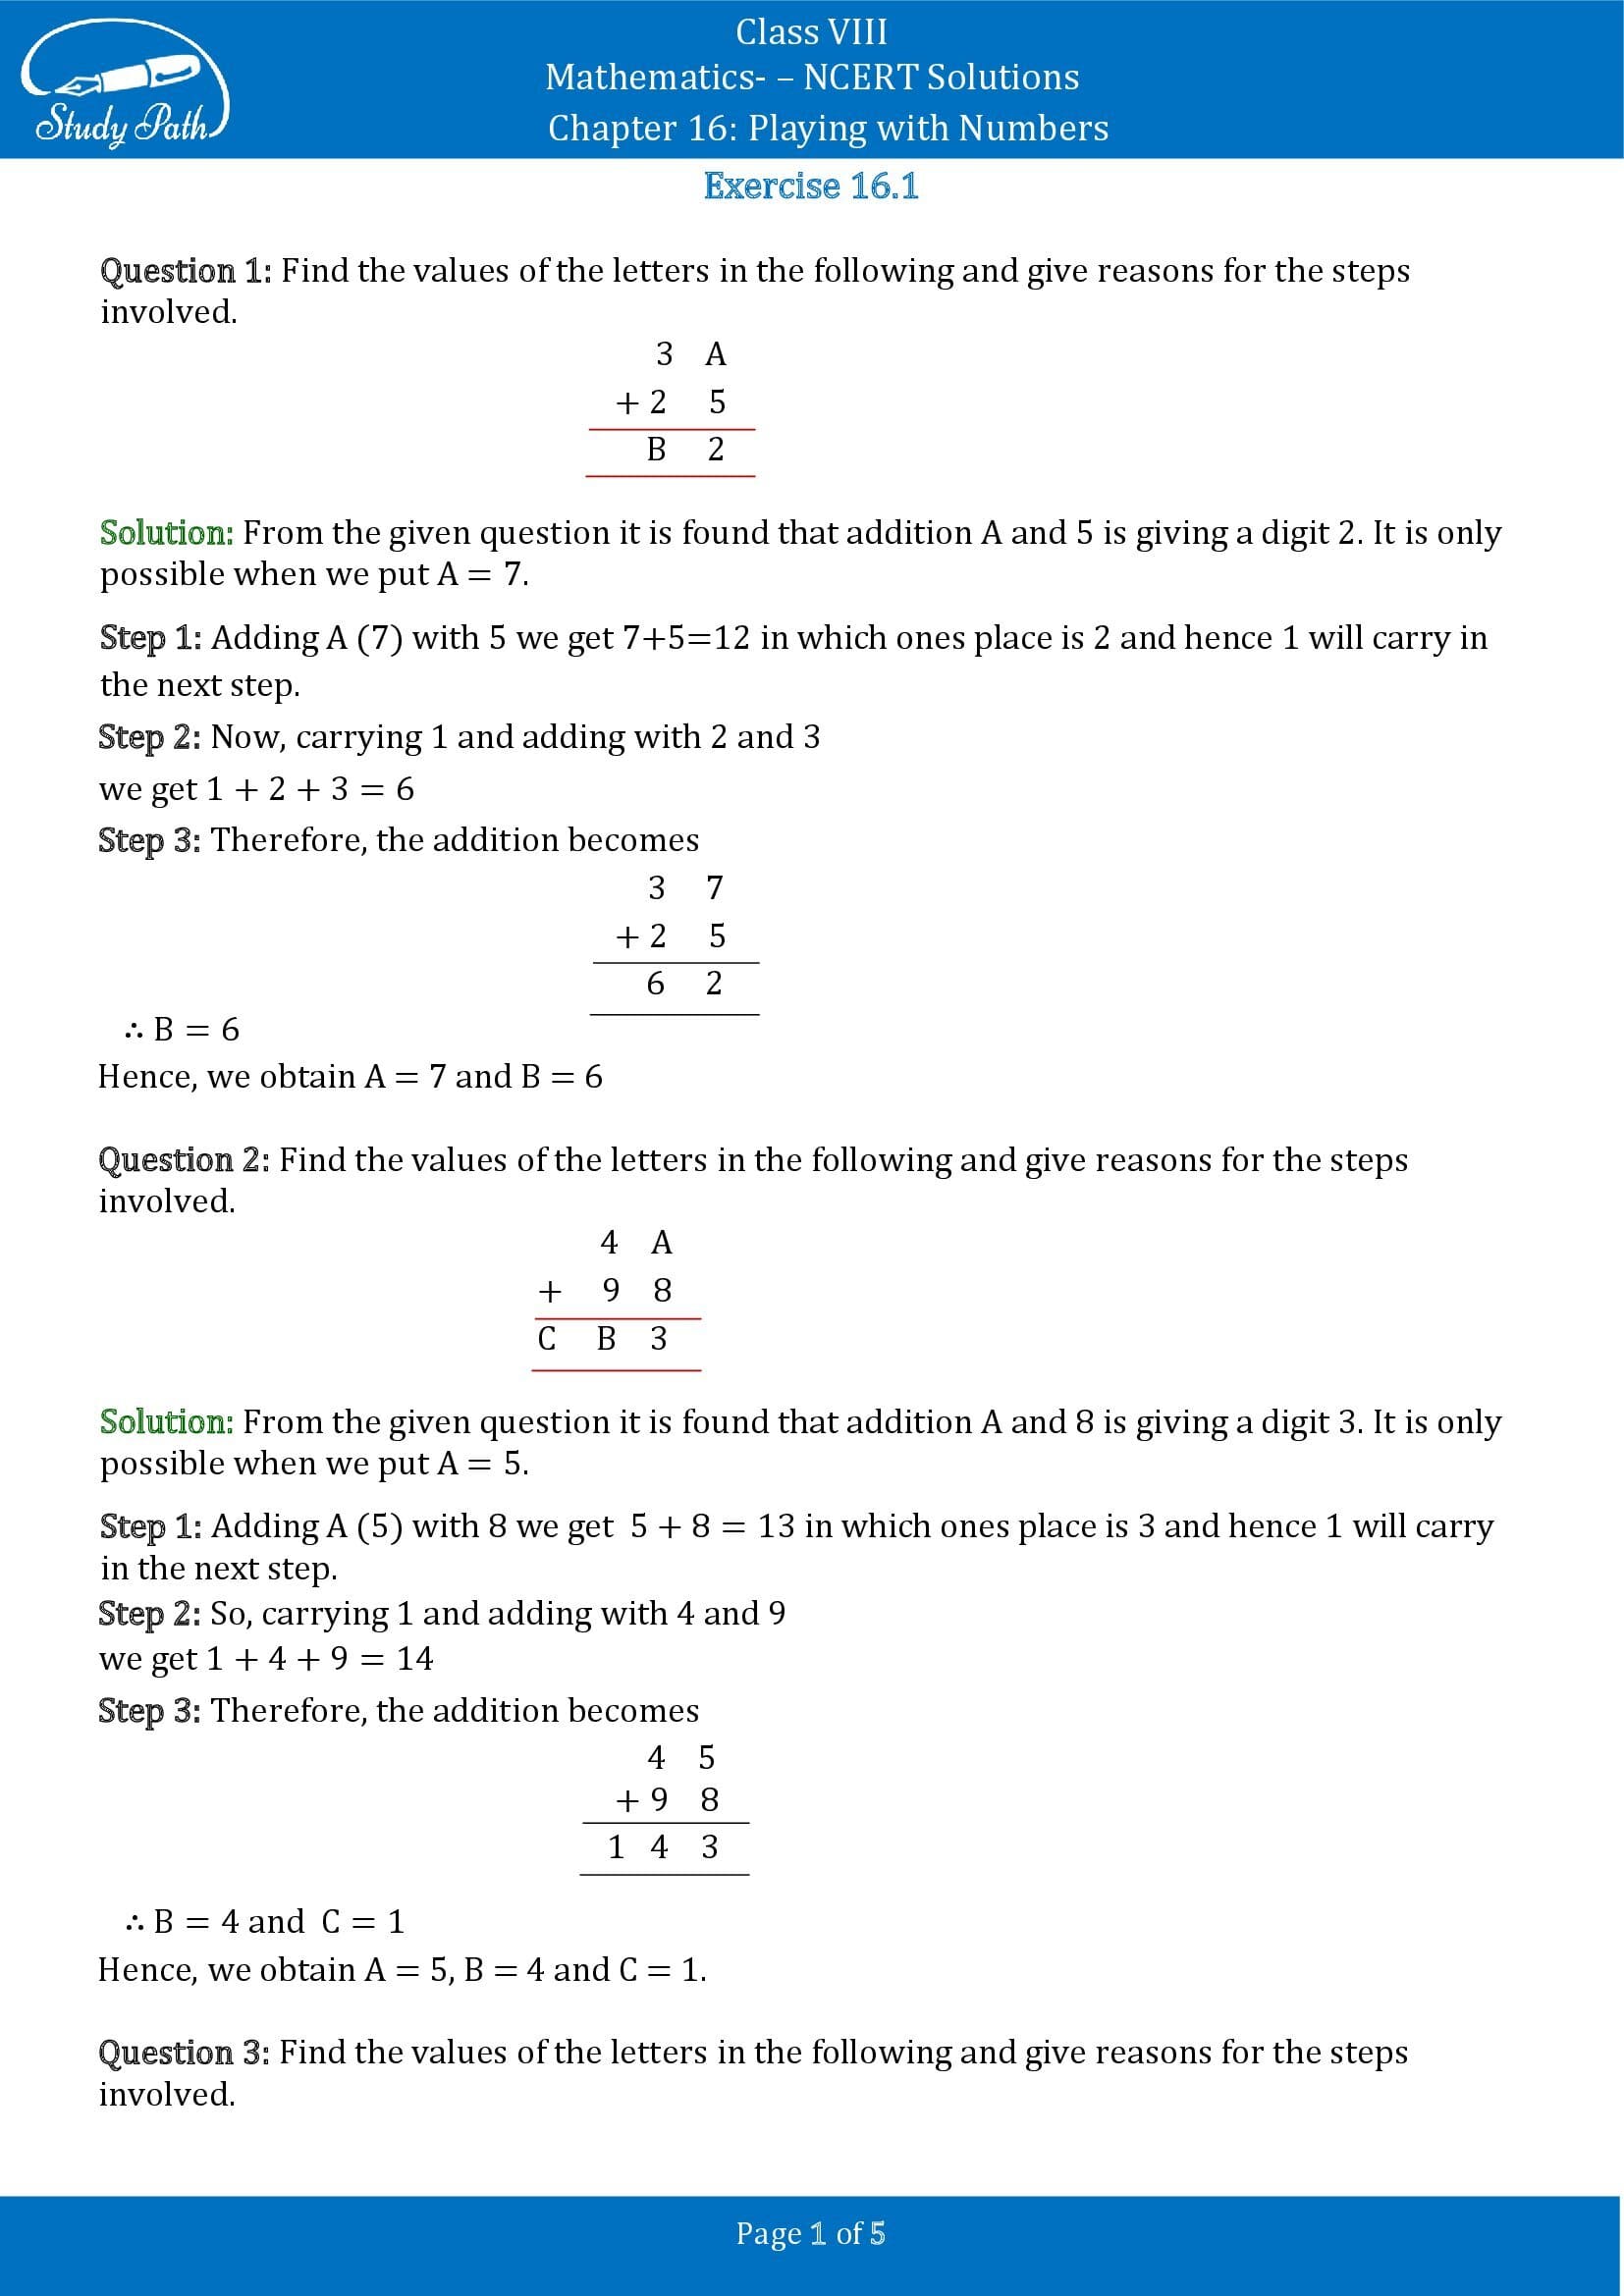 NCERT Solutions for Class 8 Maths Chapter 16 Playing with Numbers Exercise 16.1 00001